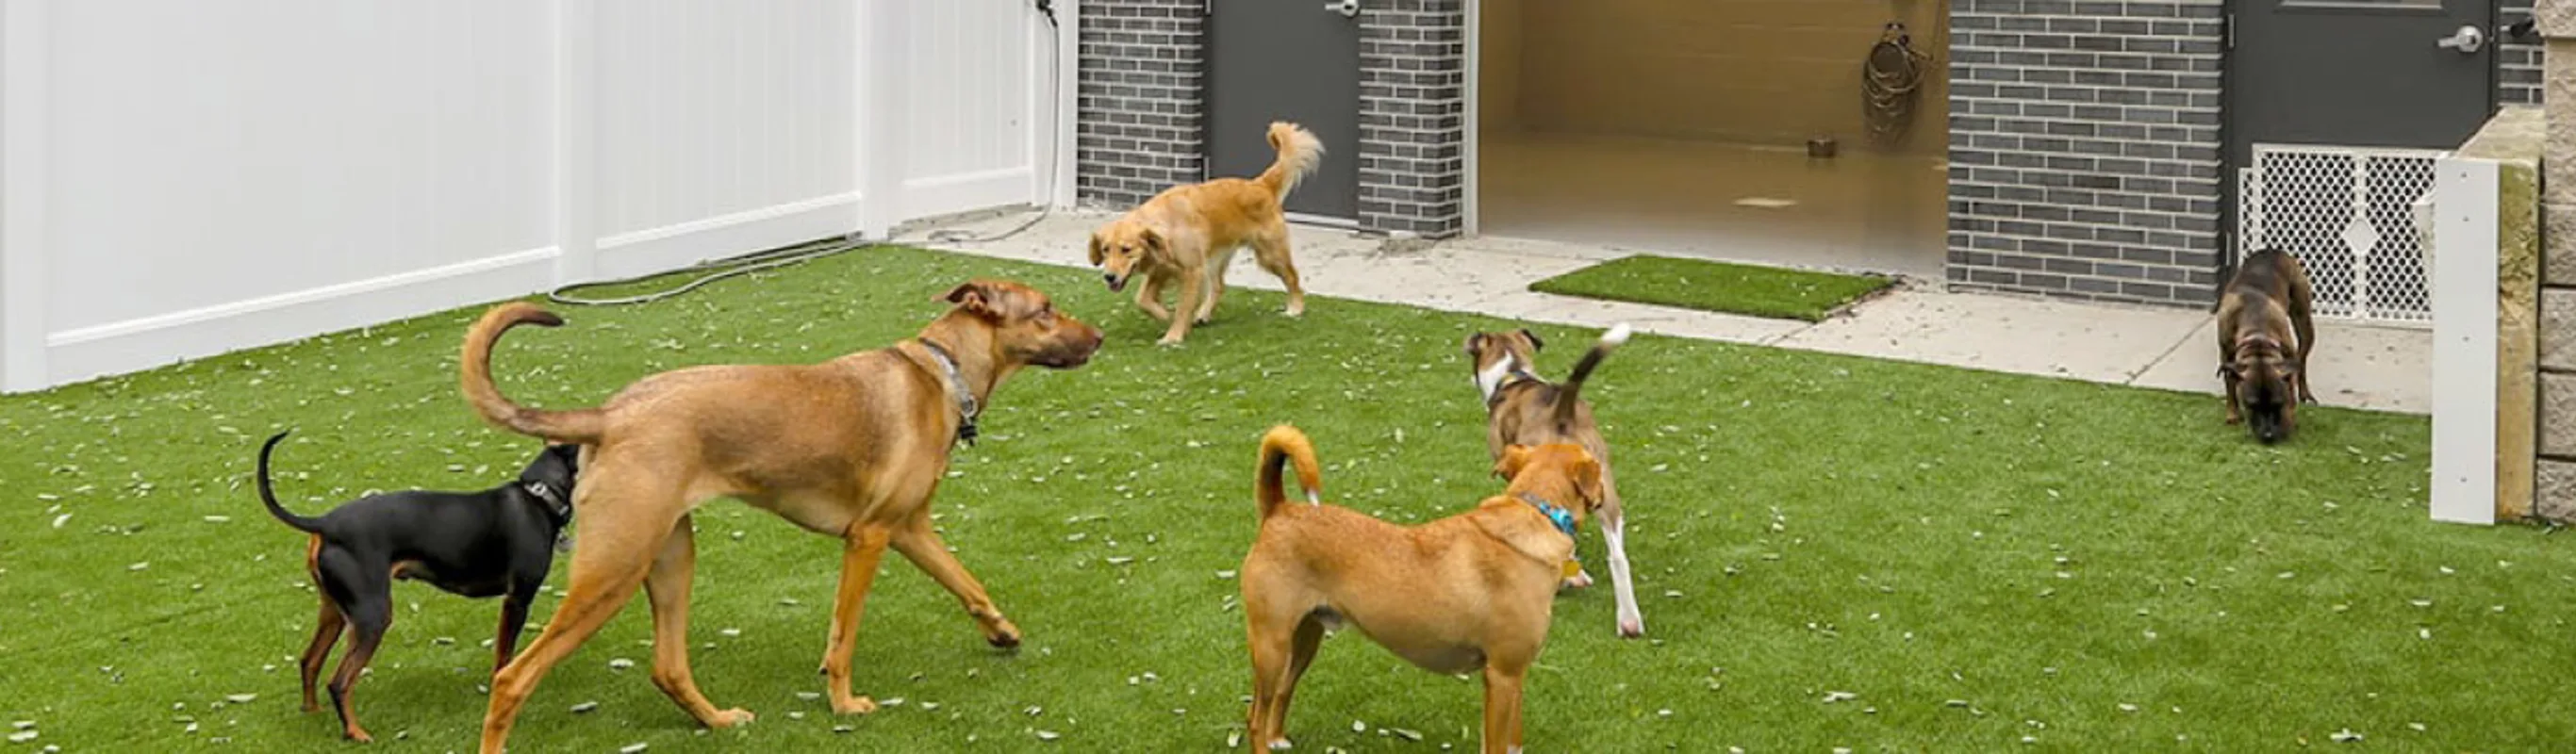 Dogs running around turf boarding area at Carriage Animal Hospital